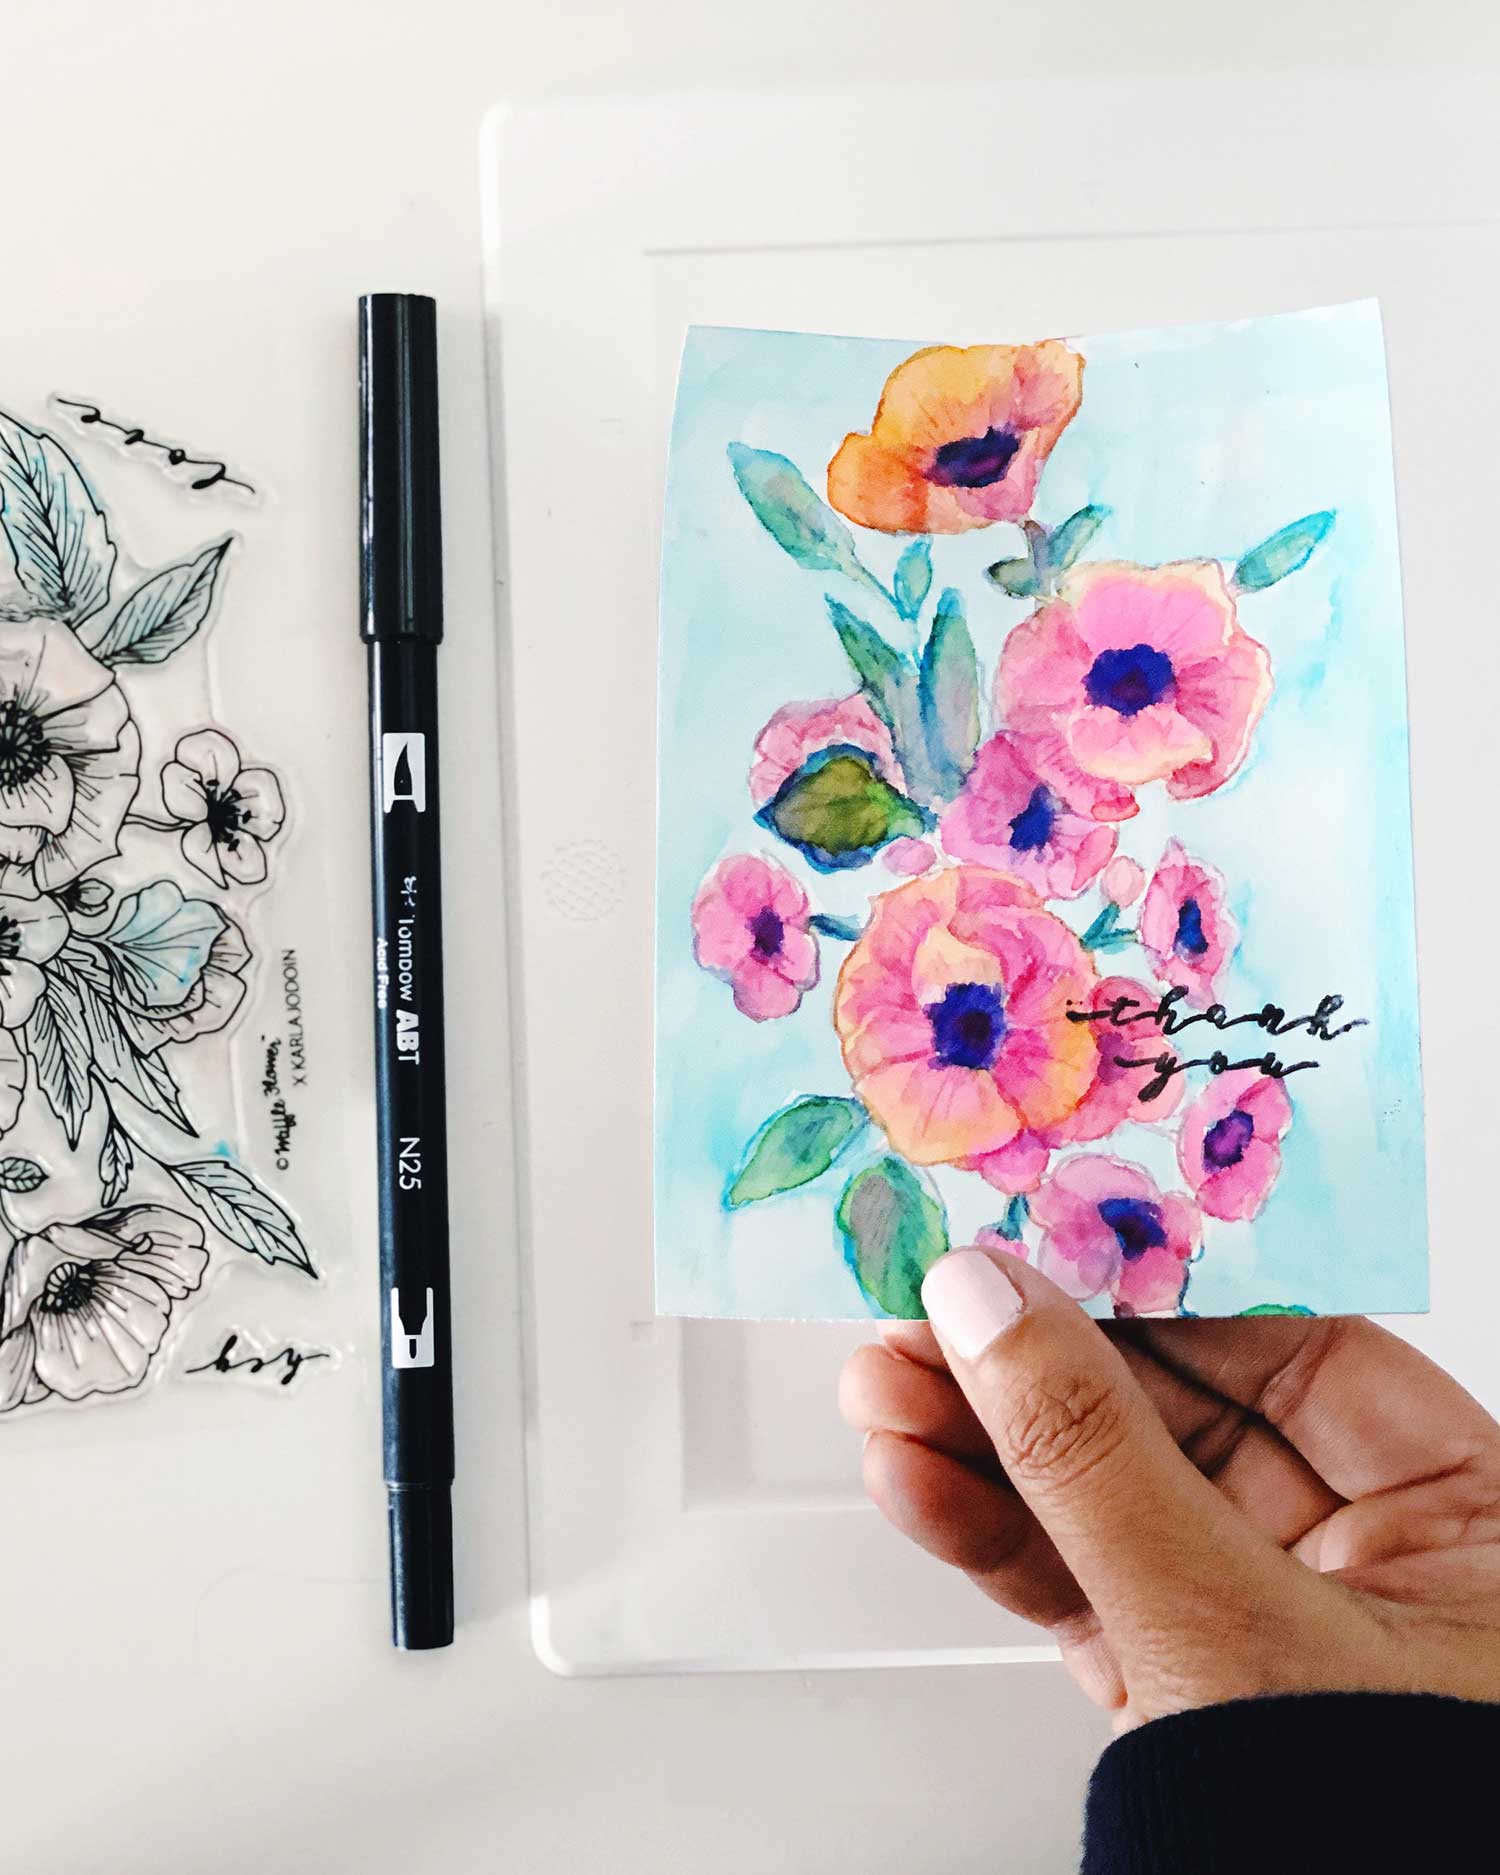 3 Different Ways to use FLORAL STAMPS to make handmade cards 